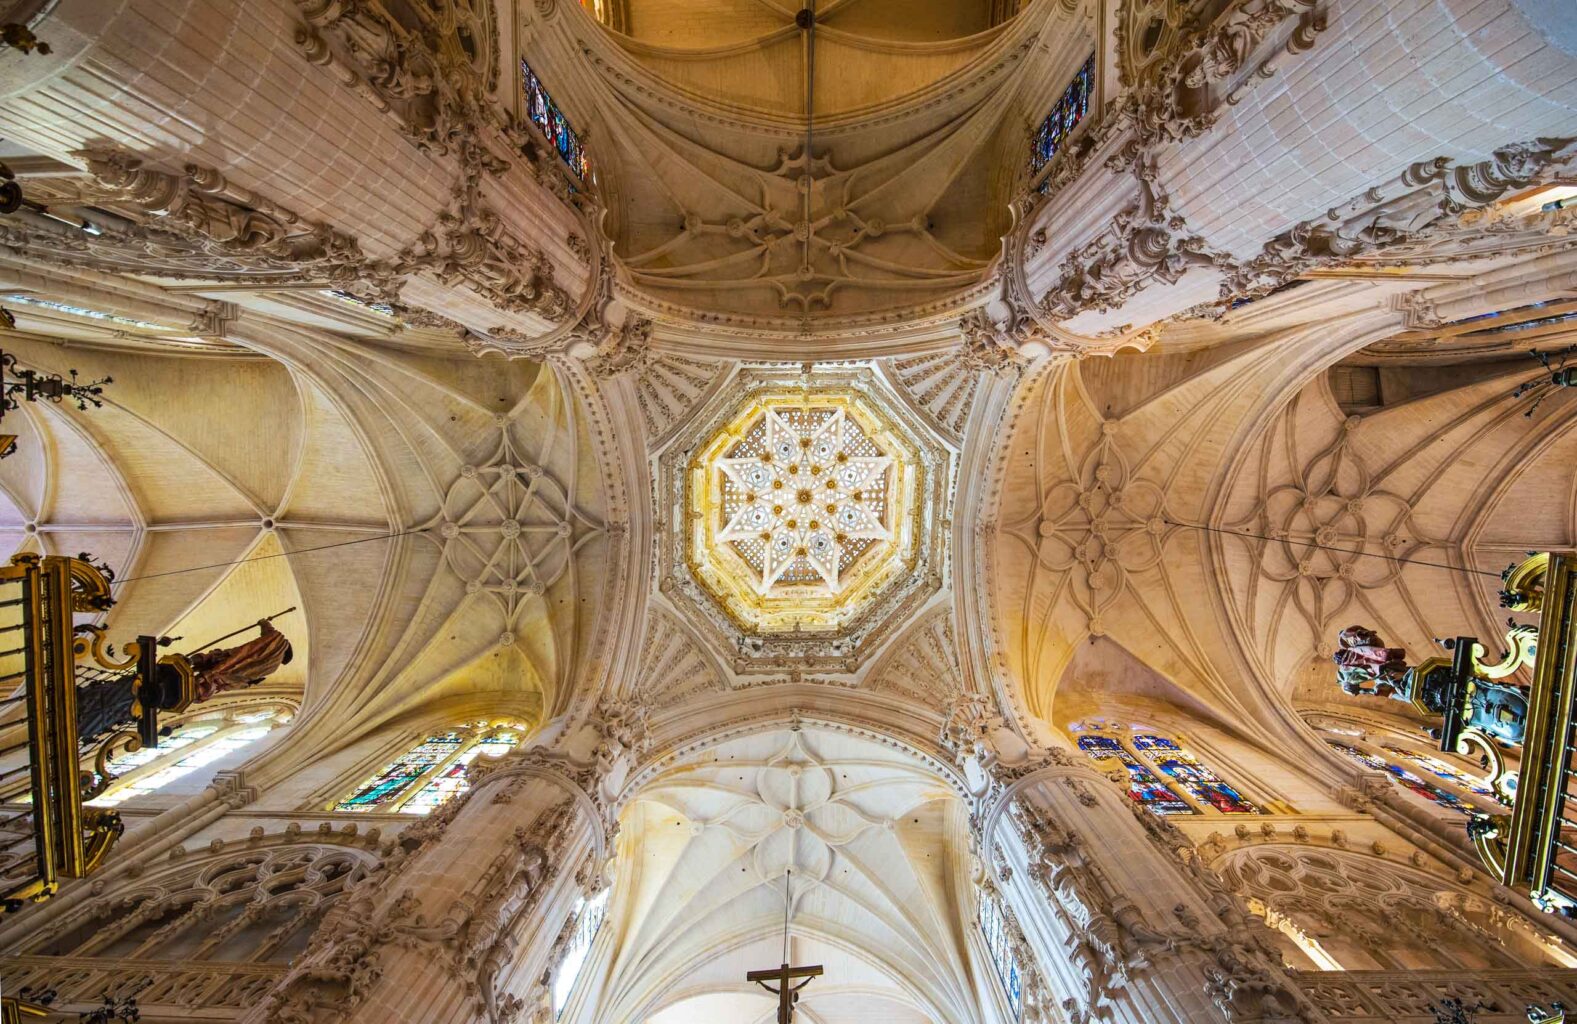 The interior of a gothic cathedral in Spain.